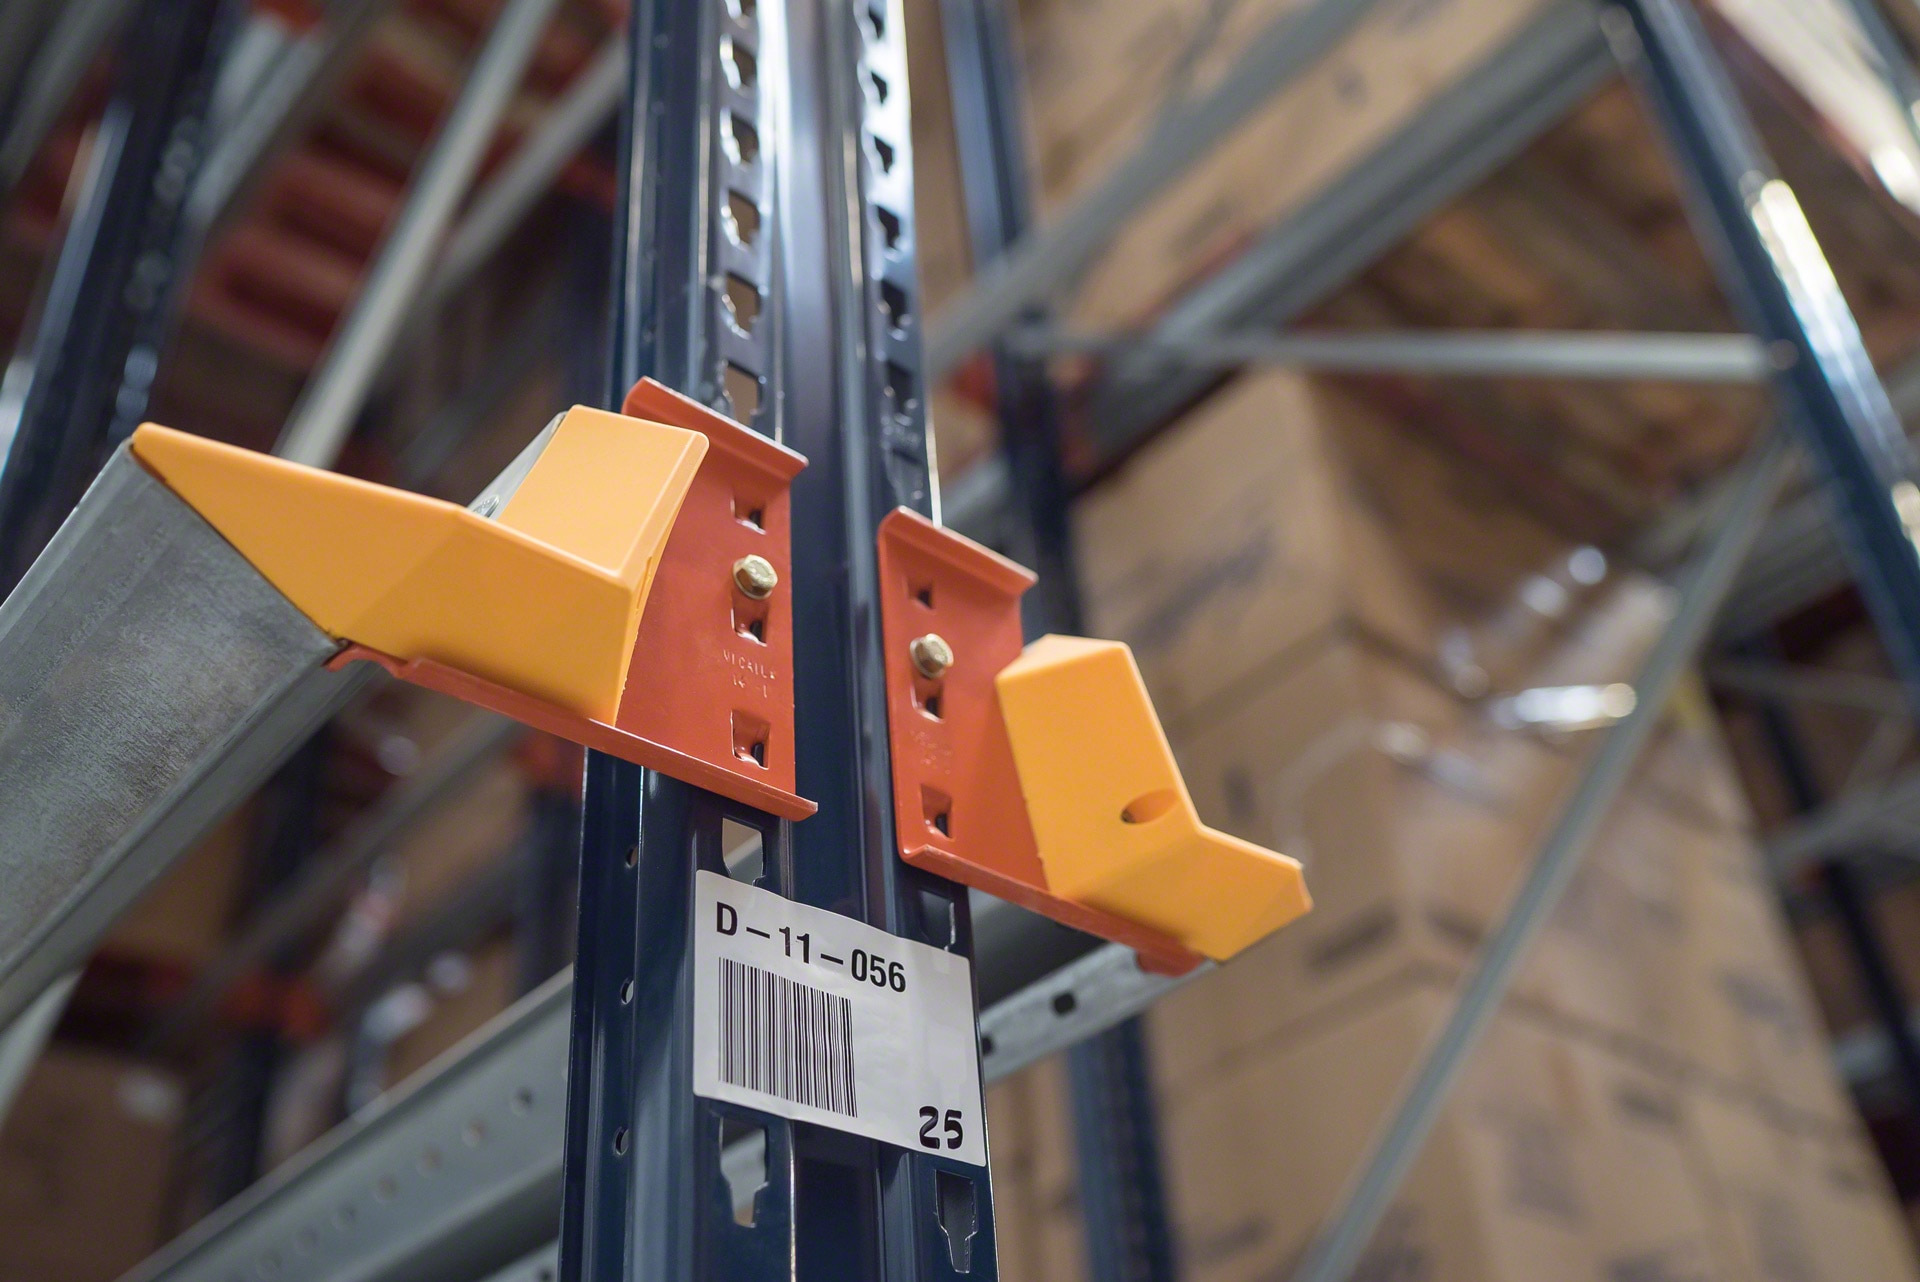 In drive-in pallet racking with GP rails, pallet centring devices help to place the load unit facing the entrance to the lane